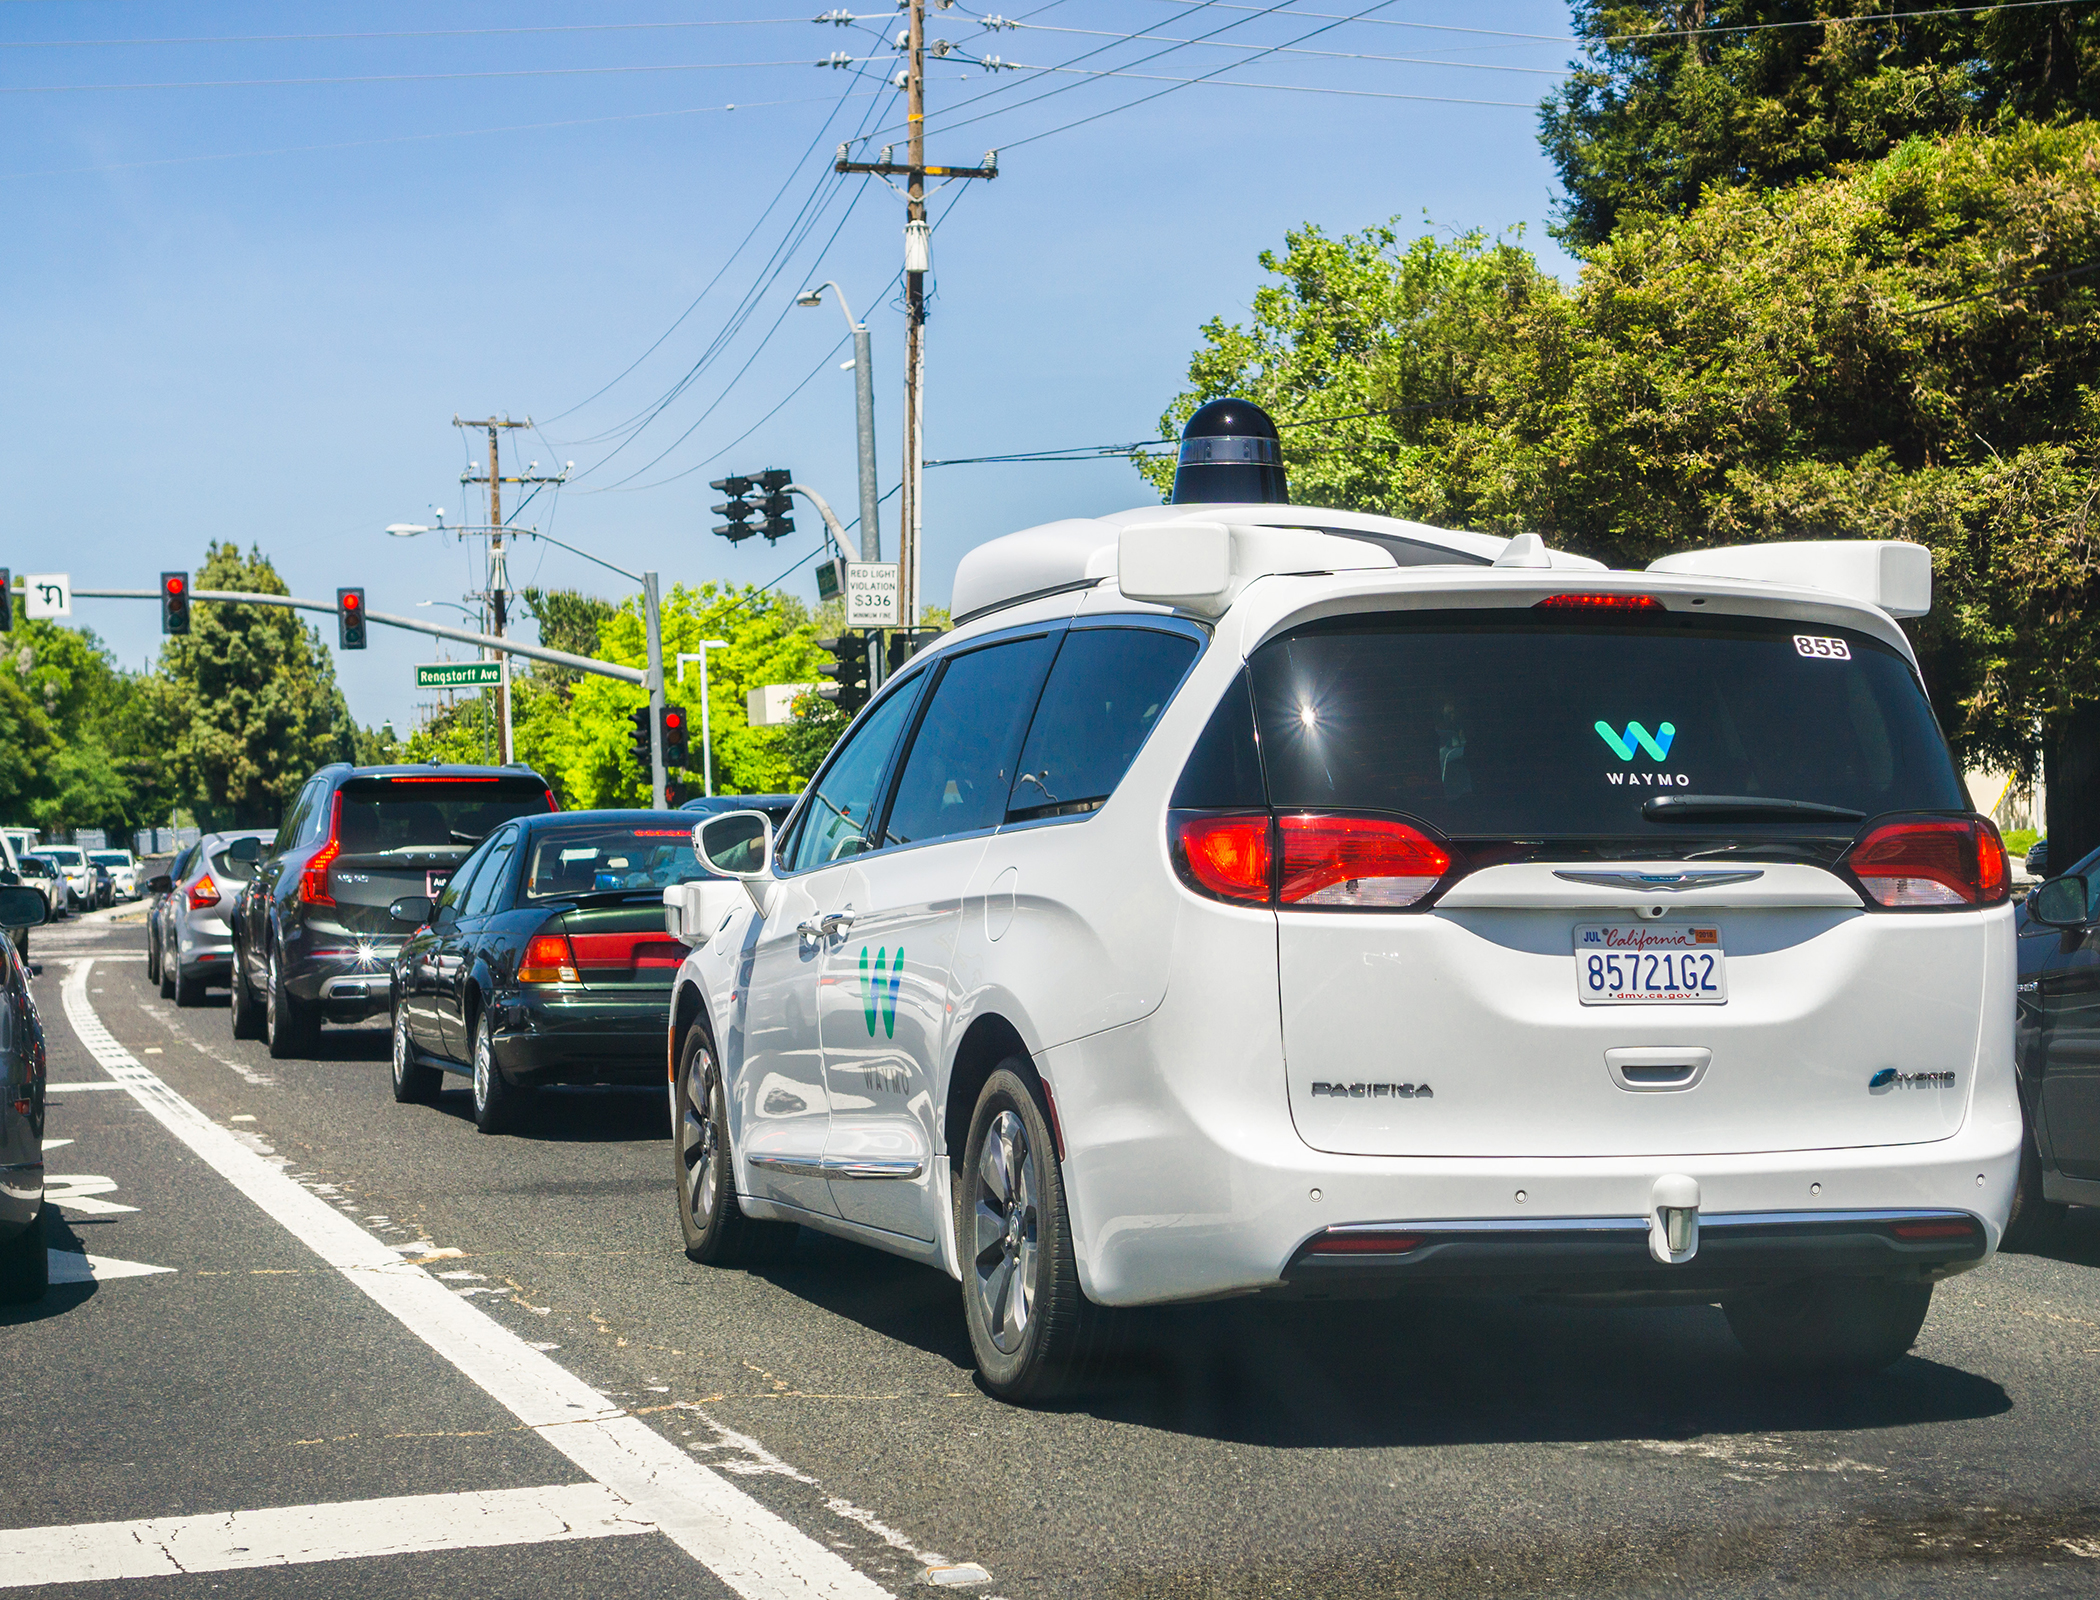 Robotaxis receive approval to operate in San Francisco 24/7